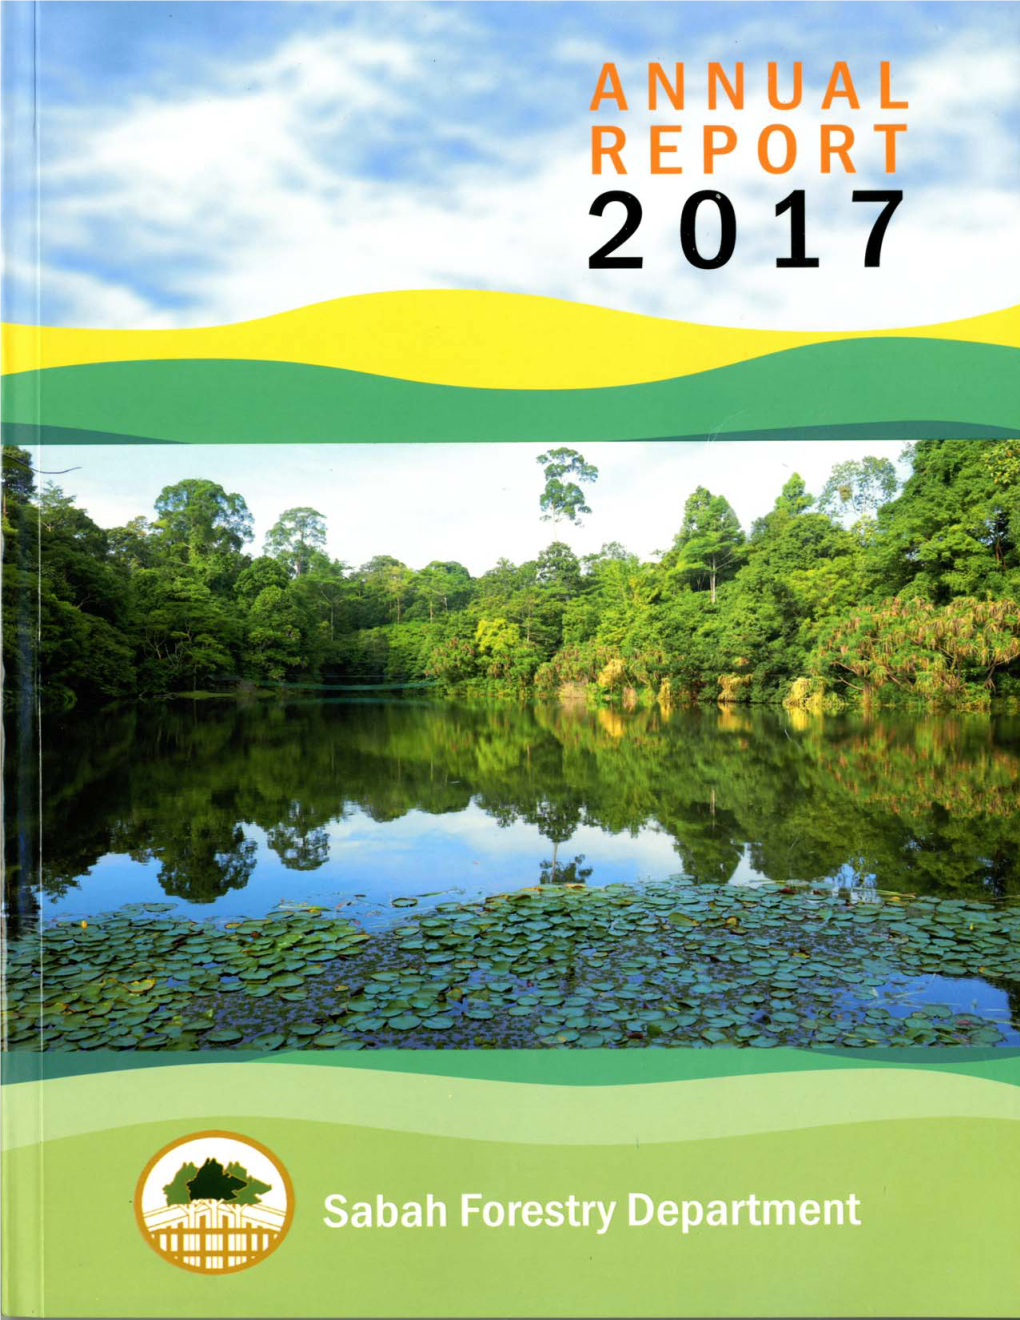 Sabah Forestry Department Annual Report 2017